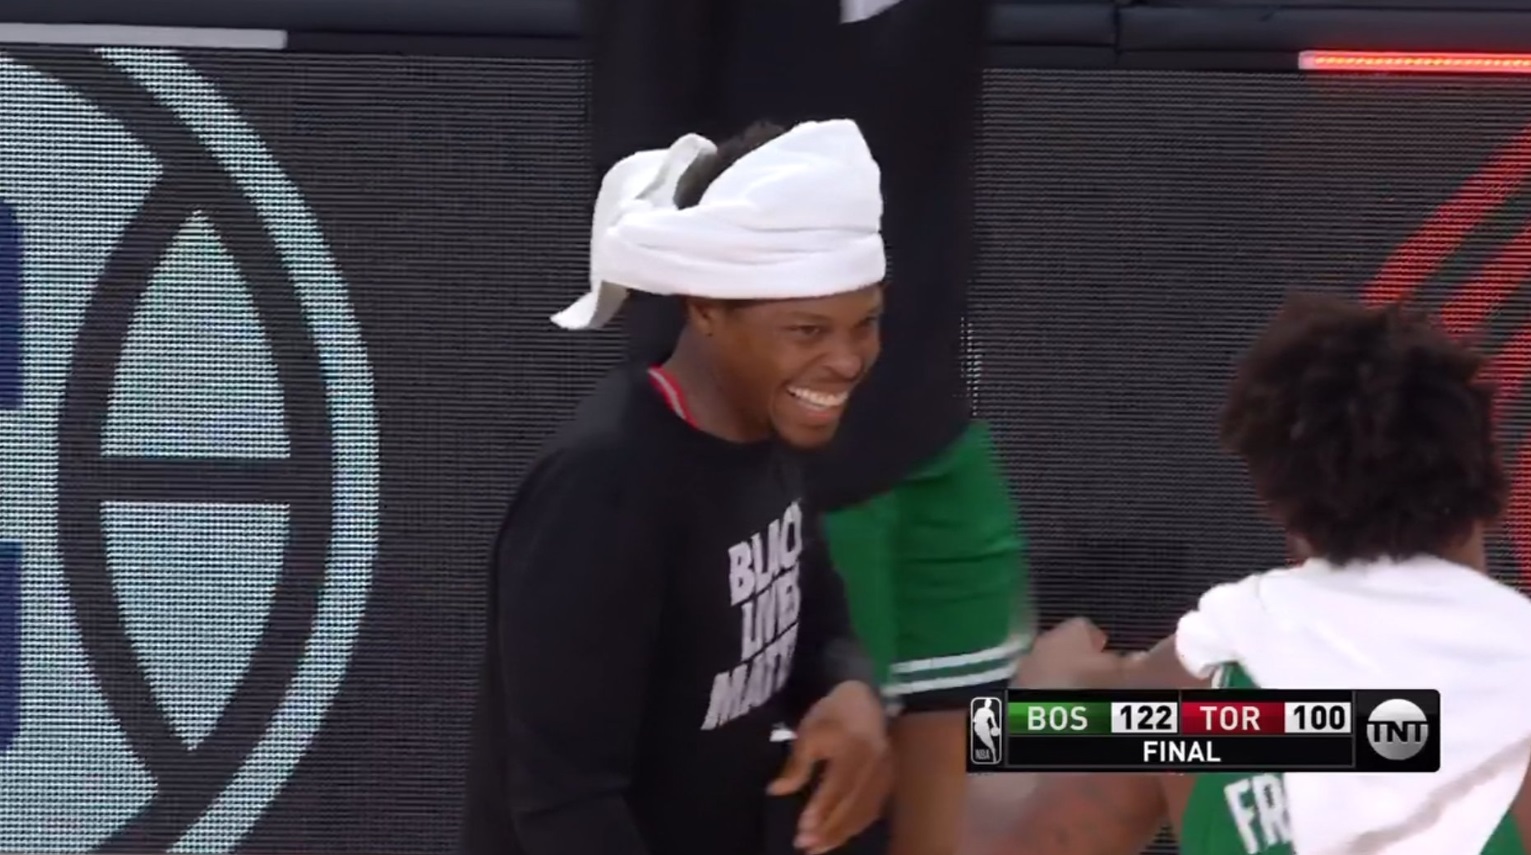 PHOTO Kyle Lowry Makes Pirate Hat Out Of Towel